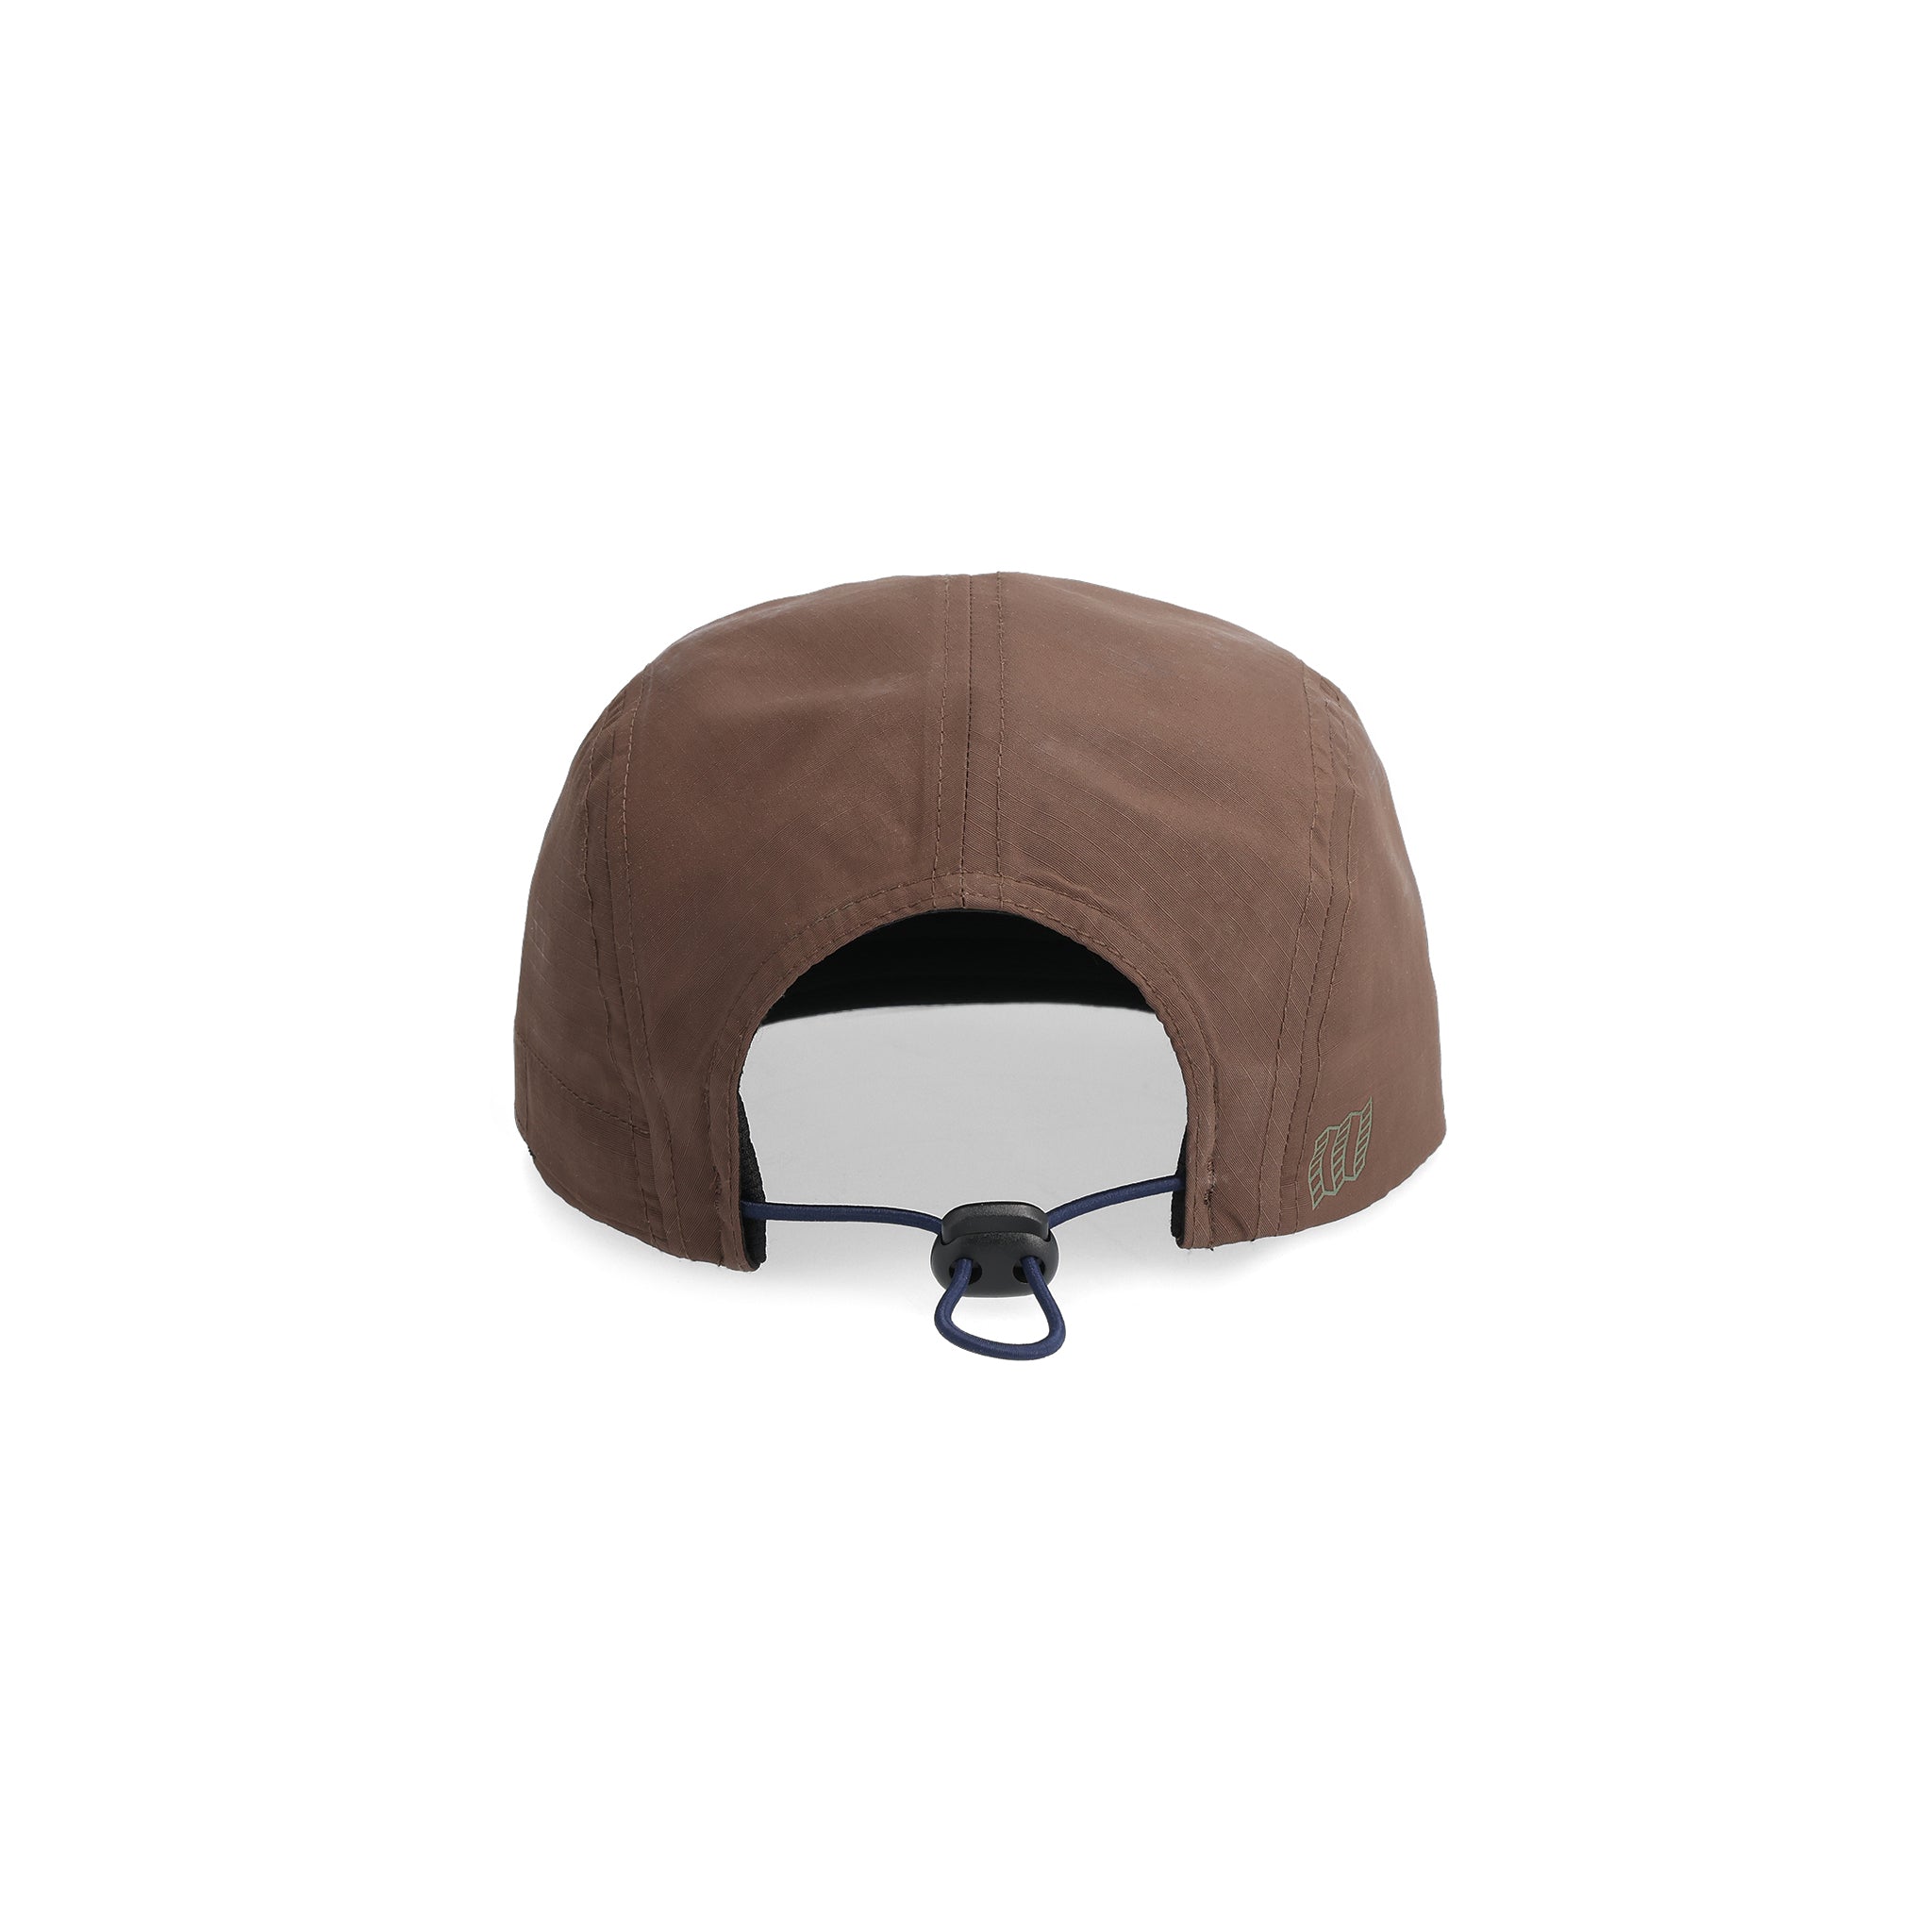 Back View of Topo Designs Global Packable Hat in "Desert Palm"